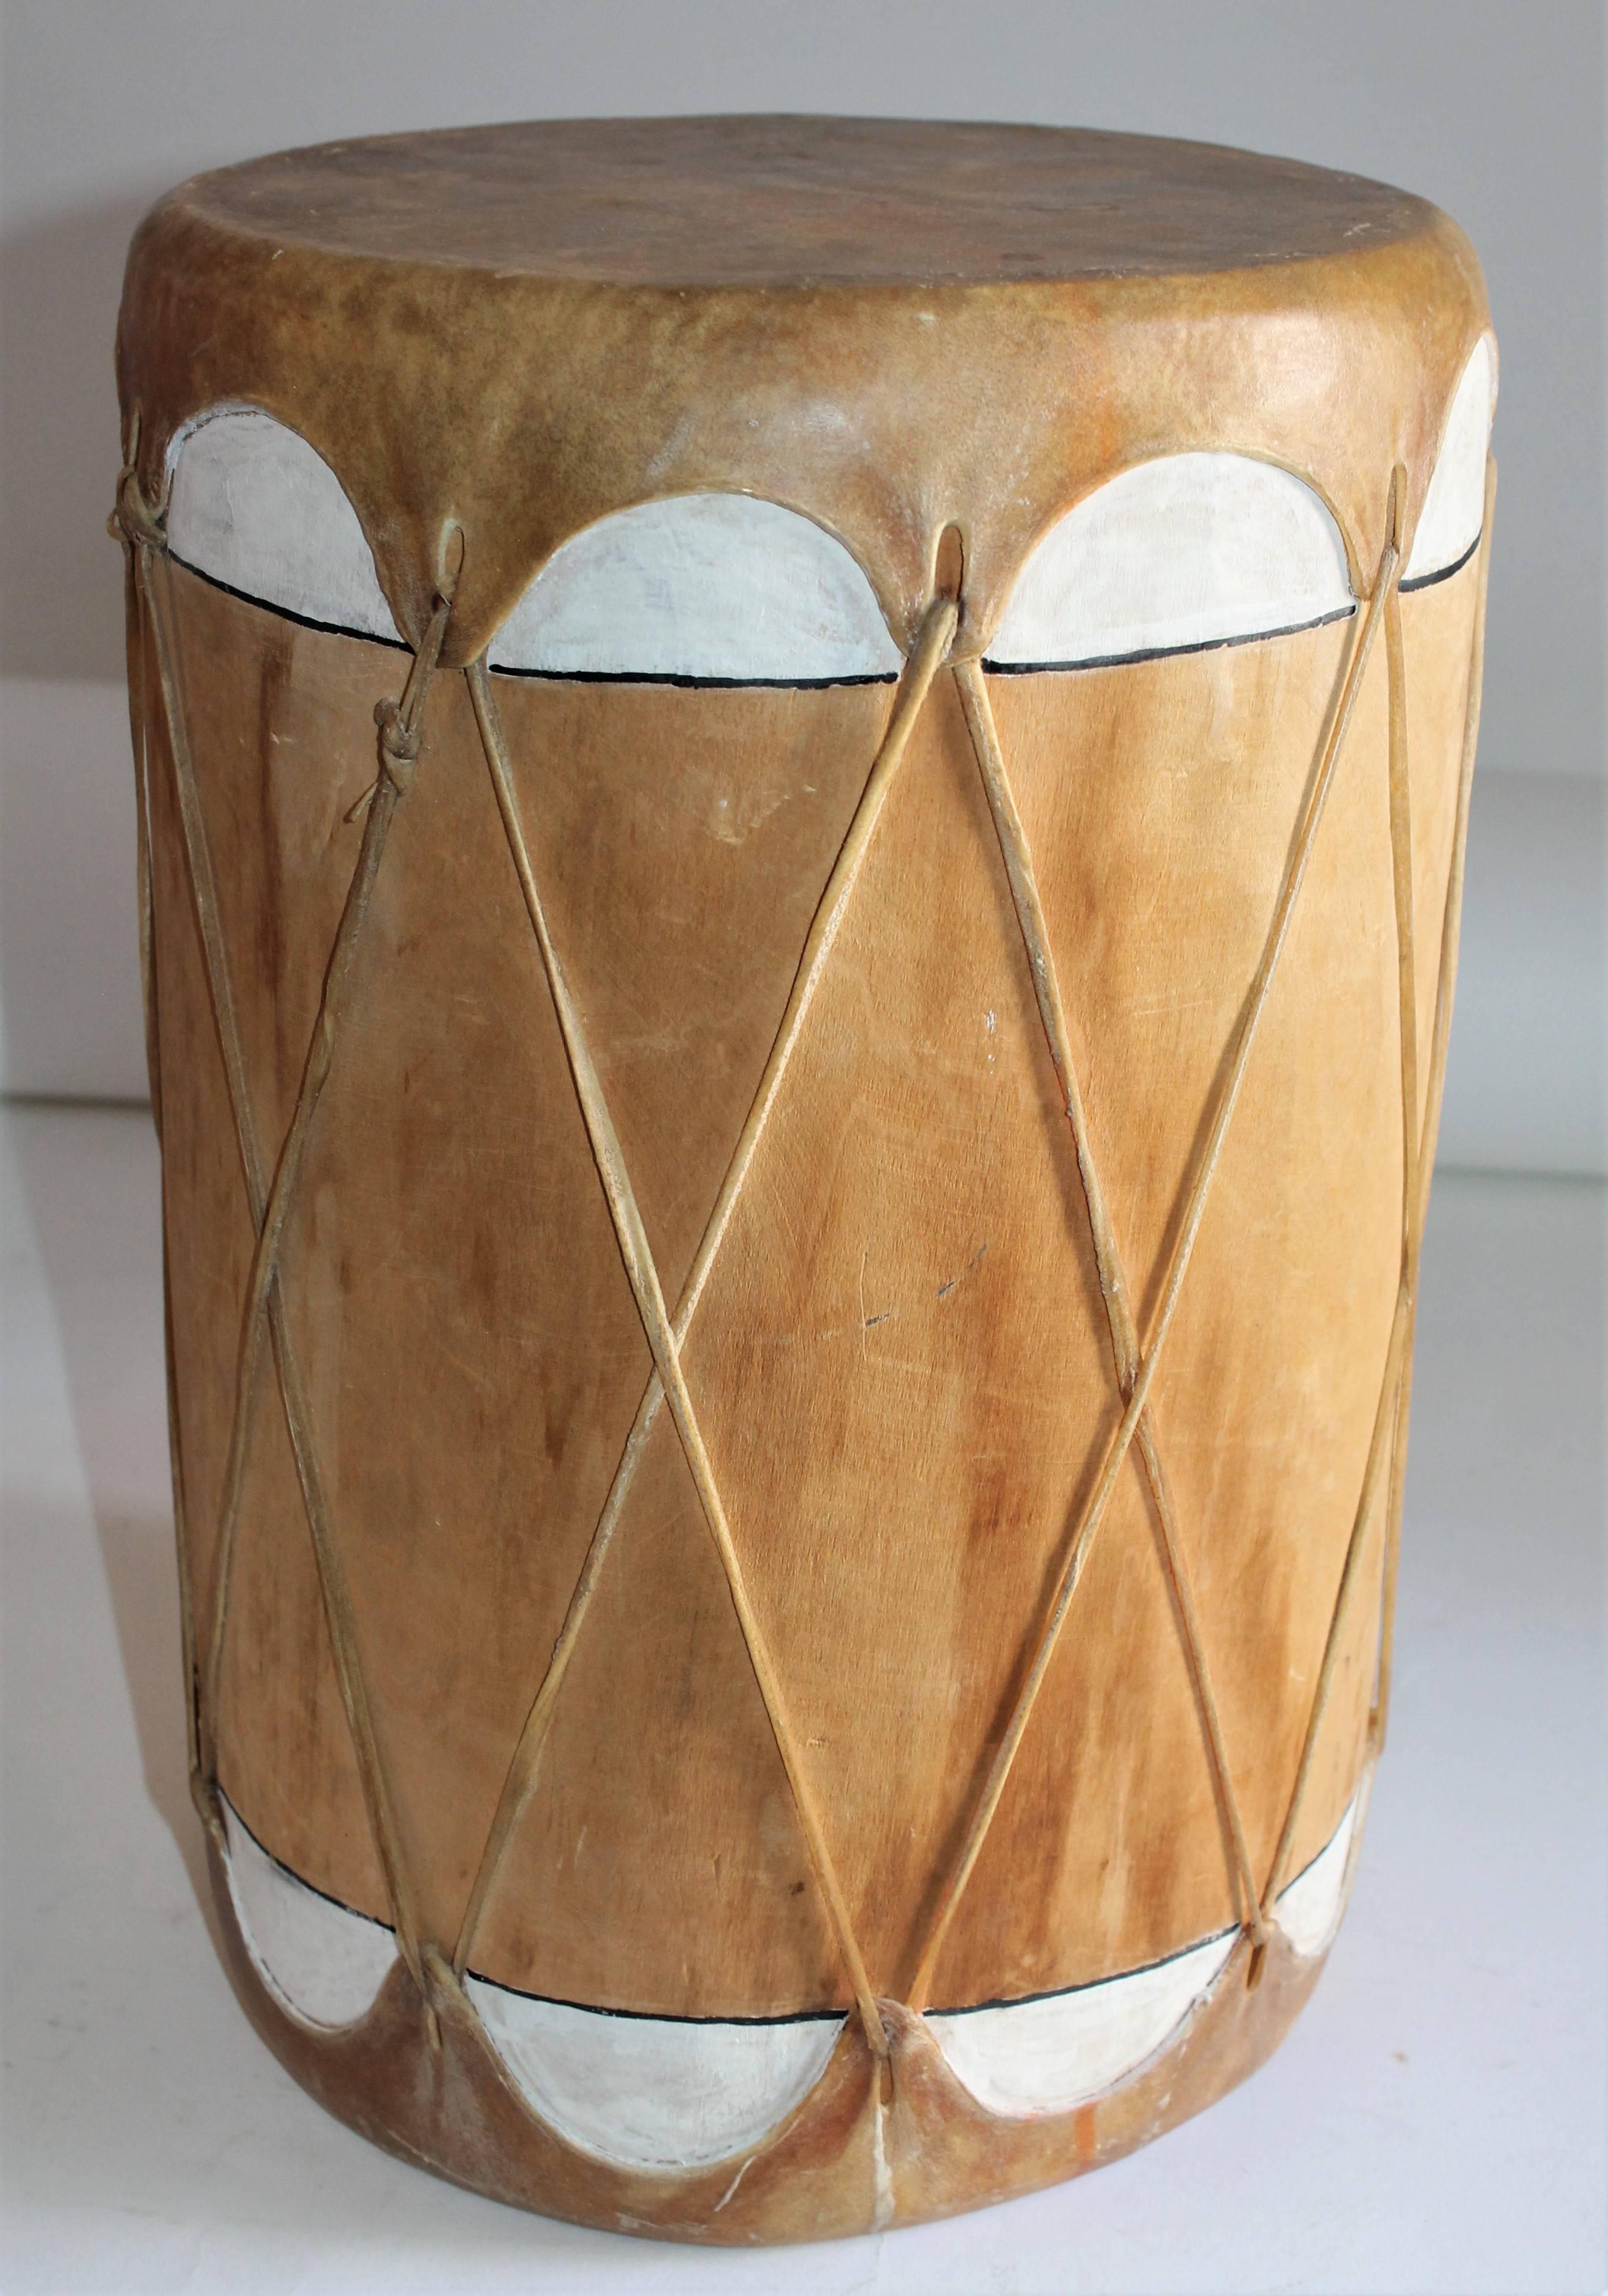 This Pueblo Indian ceremonial drum is in fine as found condition and is trimmed in original white paint. The drum is in great working order.